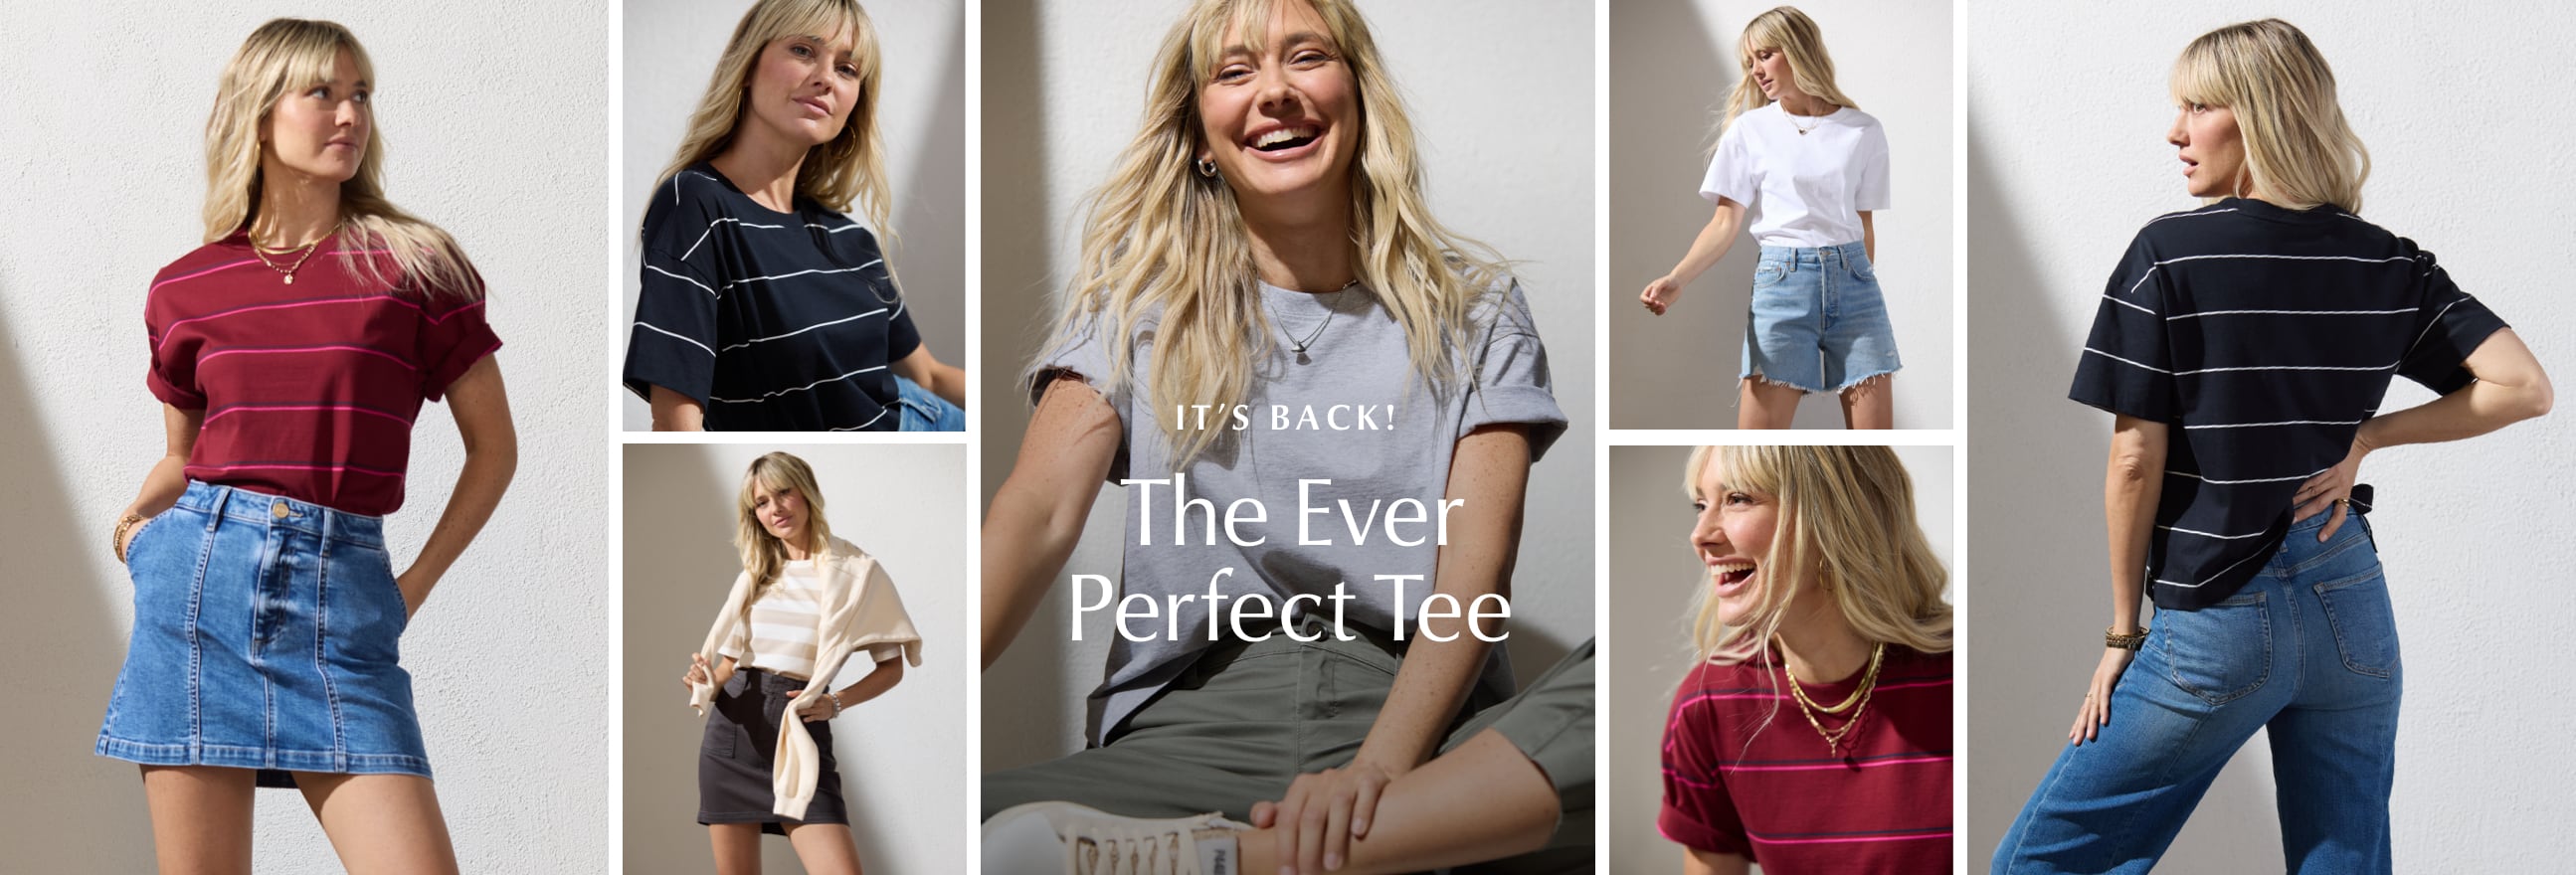 It's Back the evere perfect tee - Shop now. 